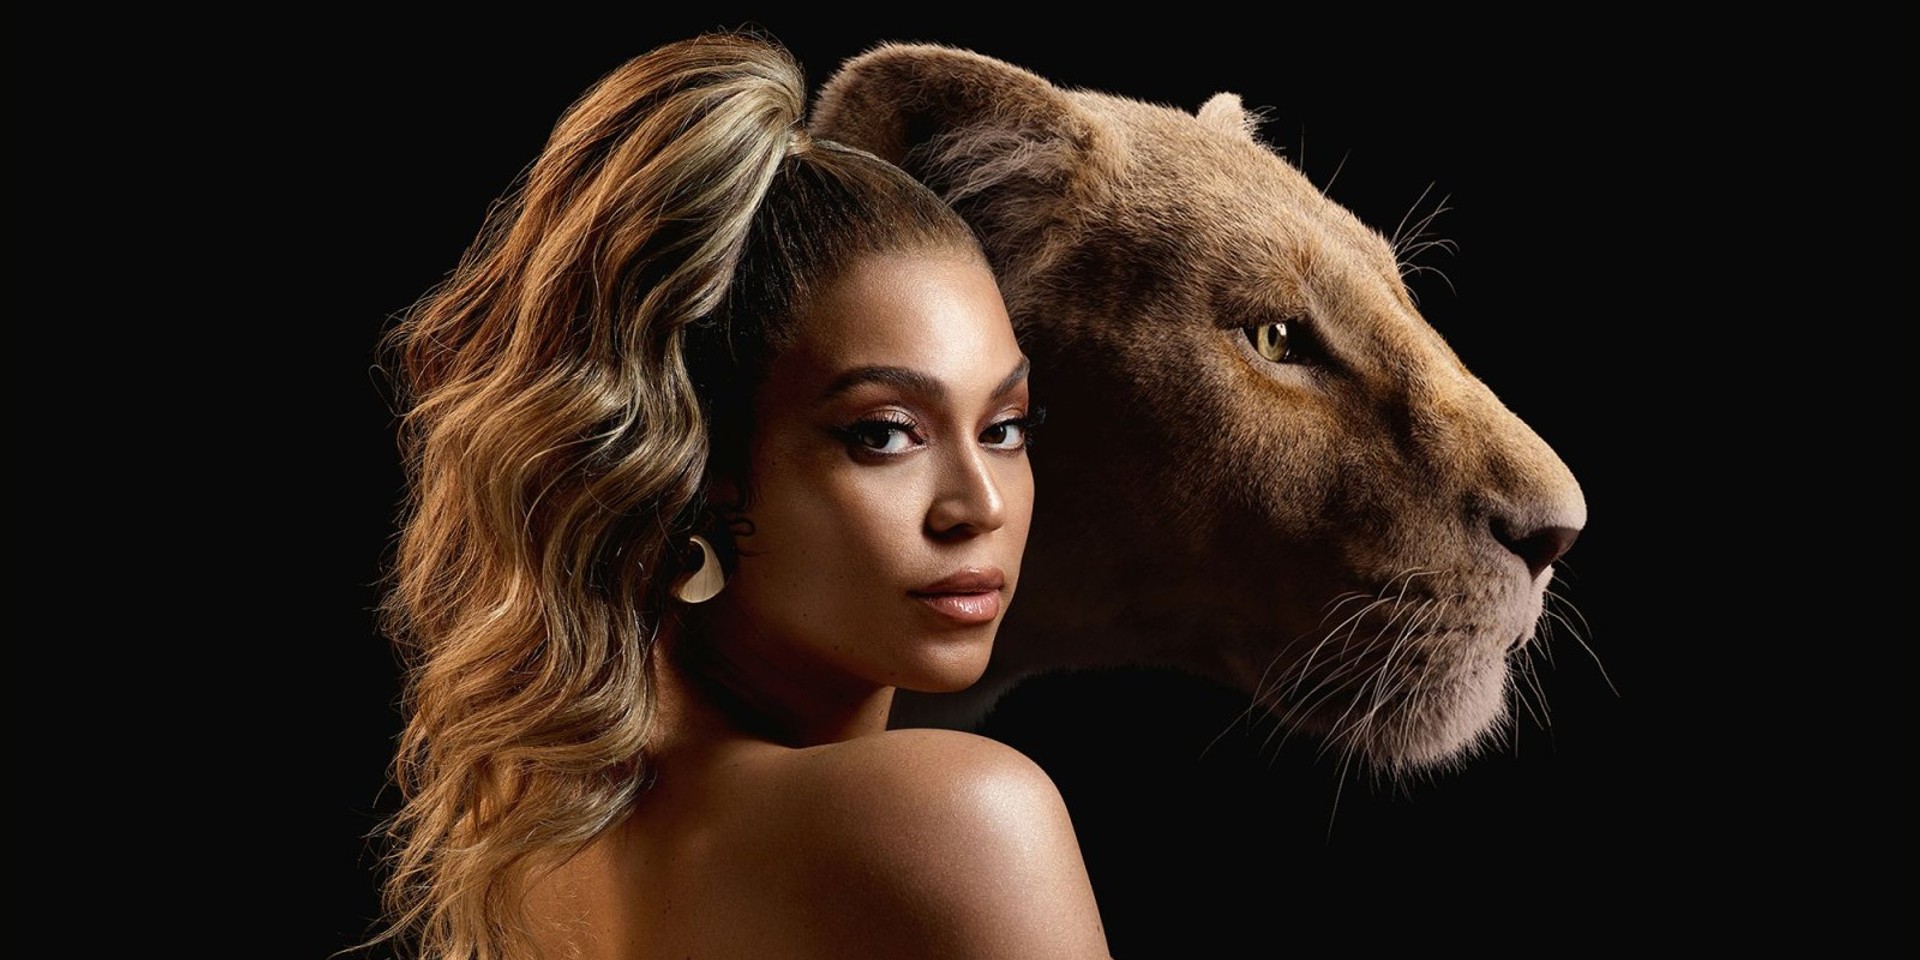 Beyoncé reveals track list for The Lion King: The Gift album – Kendrick Lamar, Childish Gambino and more to feature